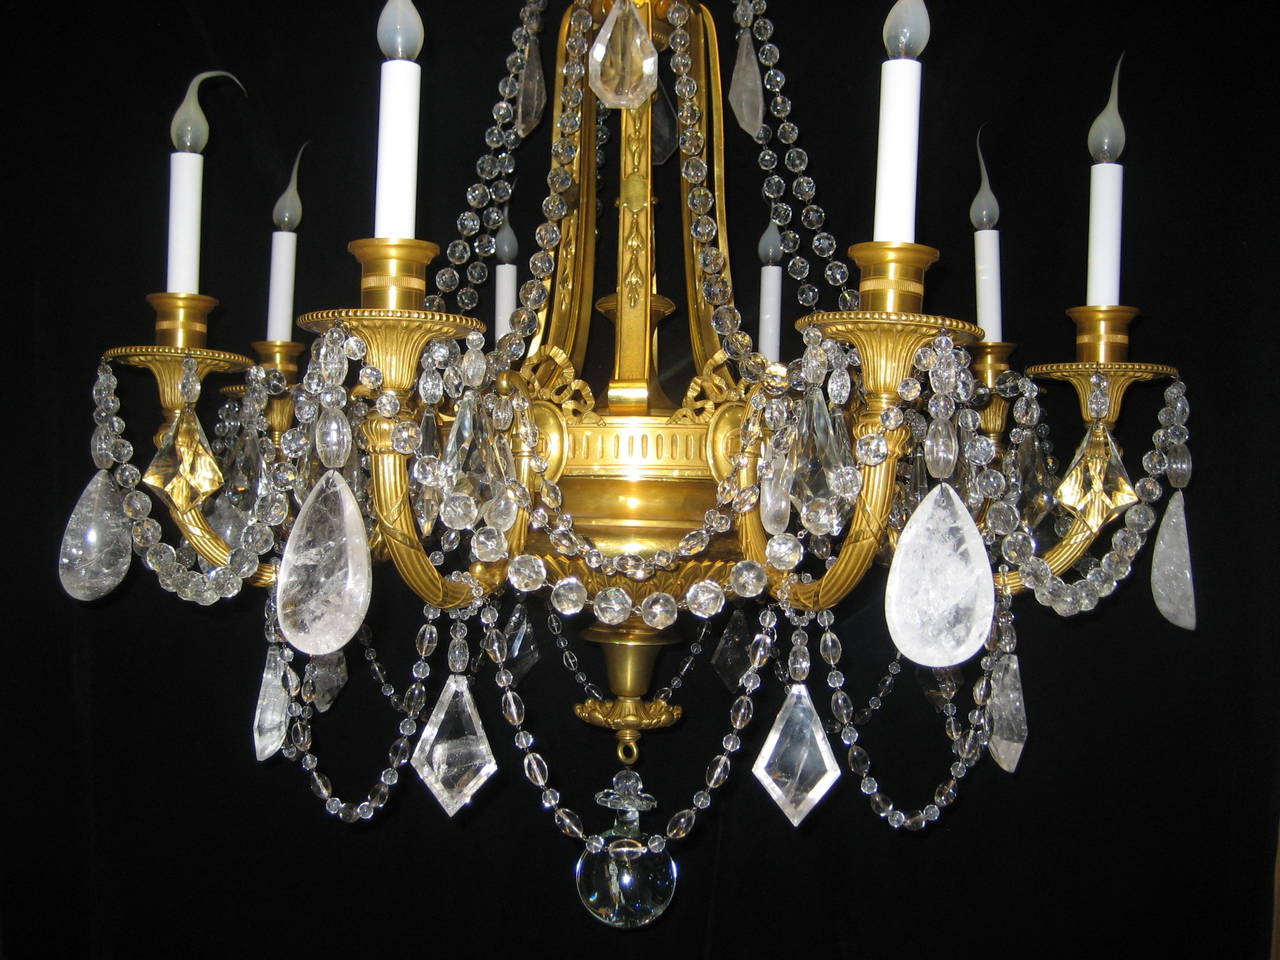 19th Century Pair of Antique French Louis XVI Style Gilt Bronze and Rock Crystal Chandeliers